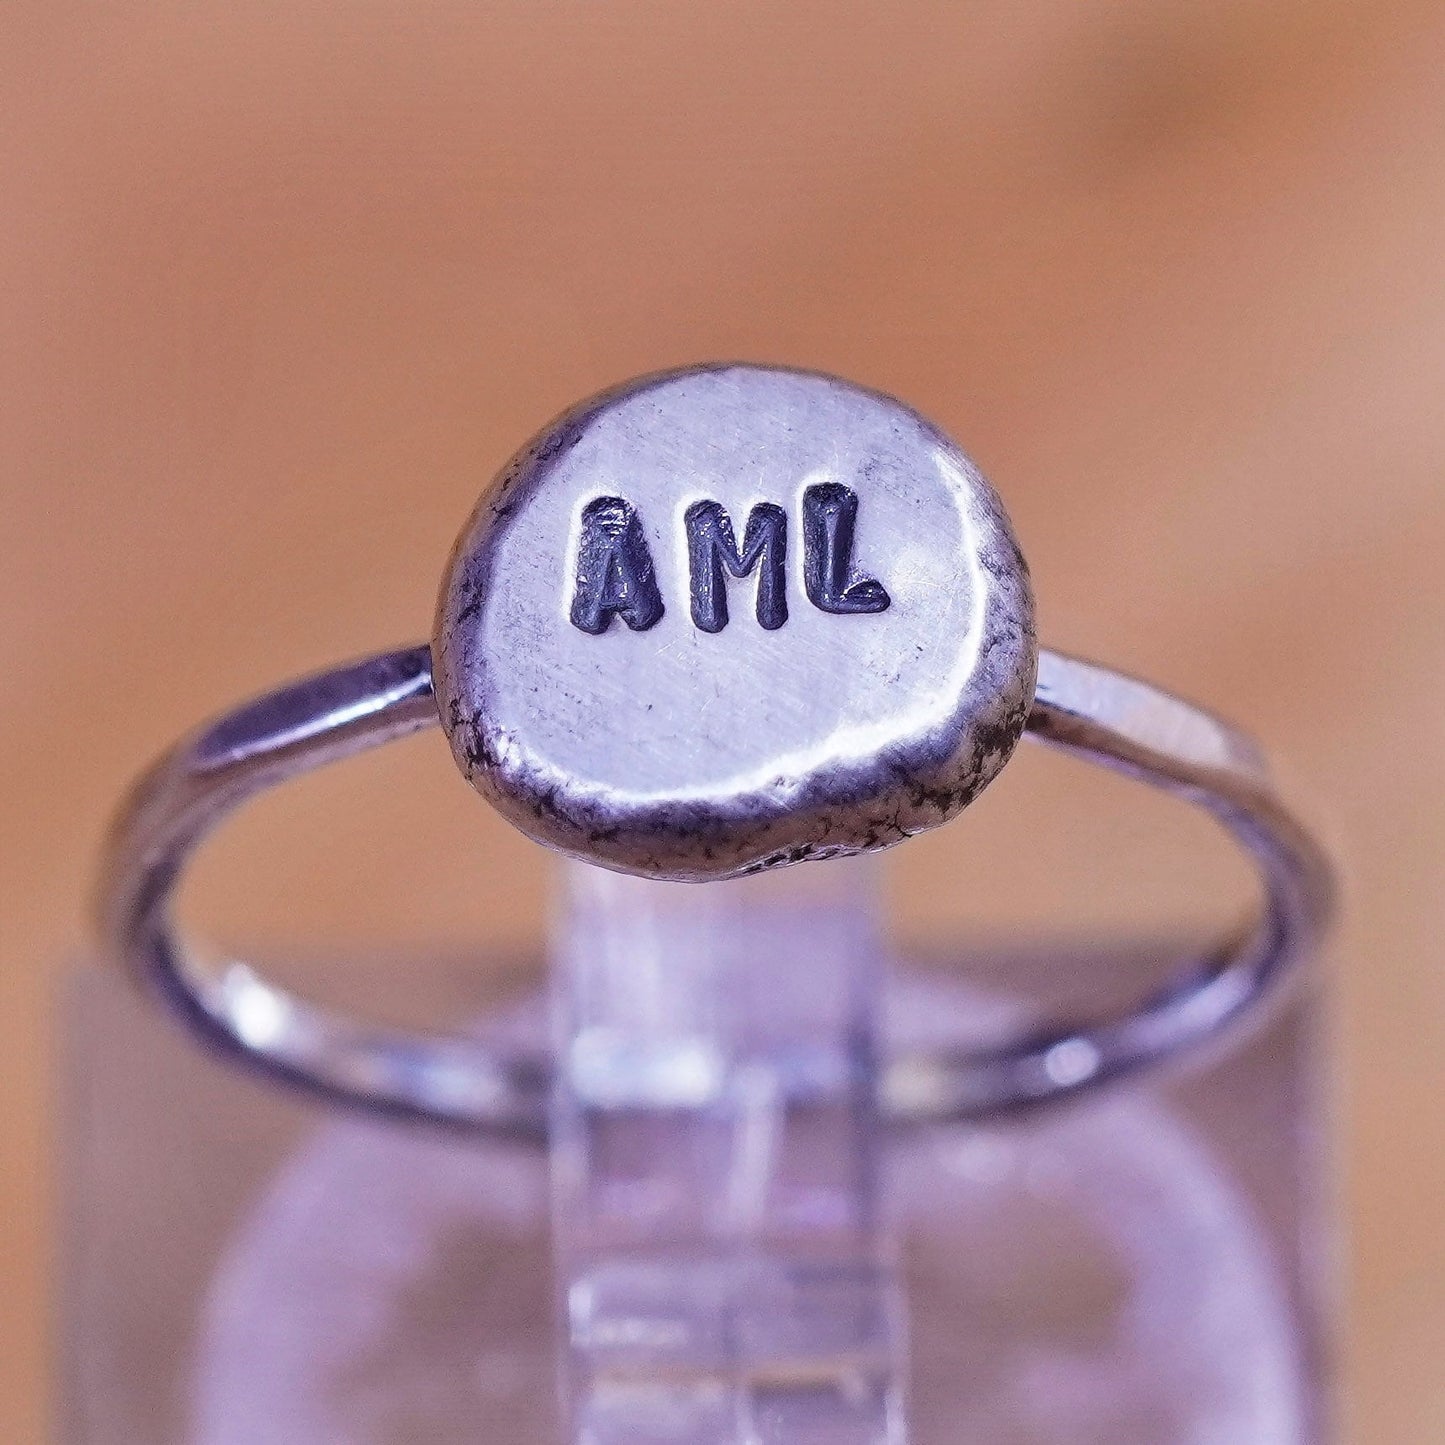 Size 4.75, vintage Sterling silver ring, 925 initial letter “AML” band